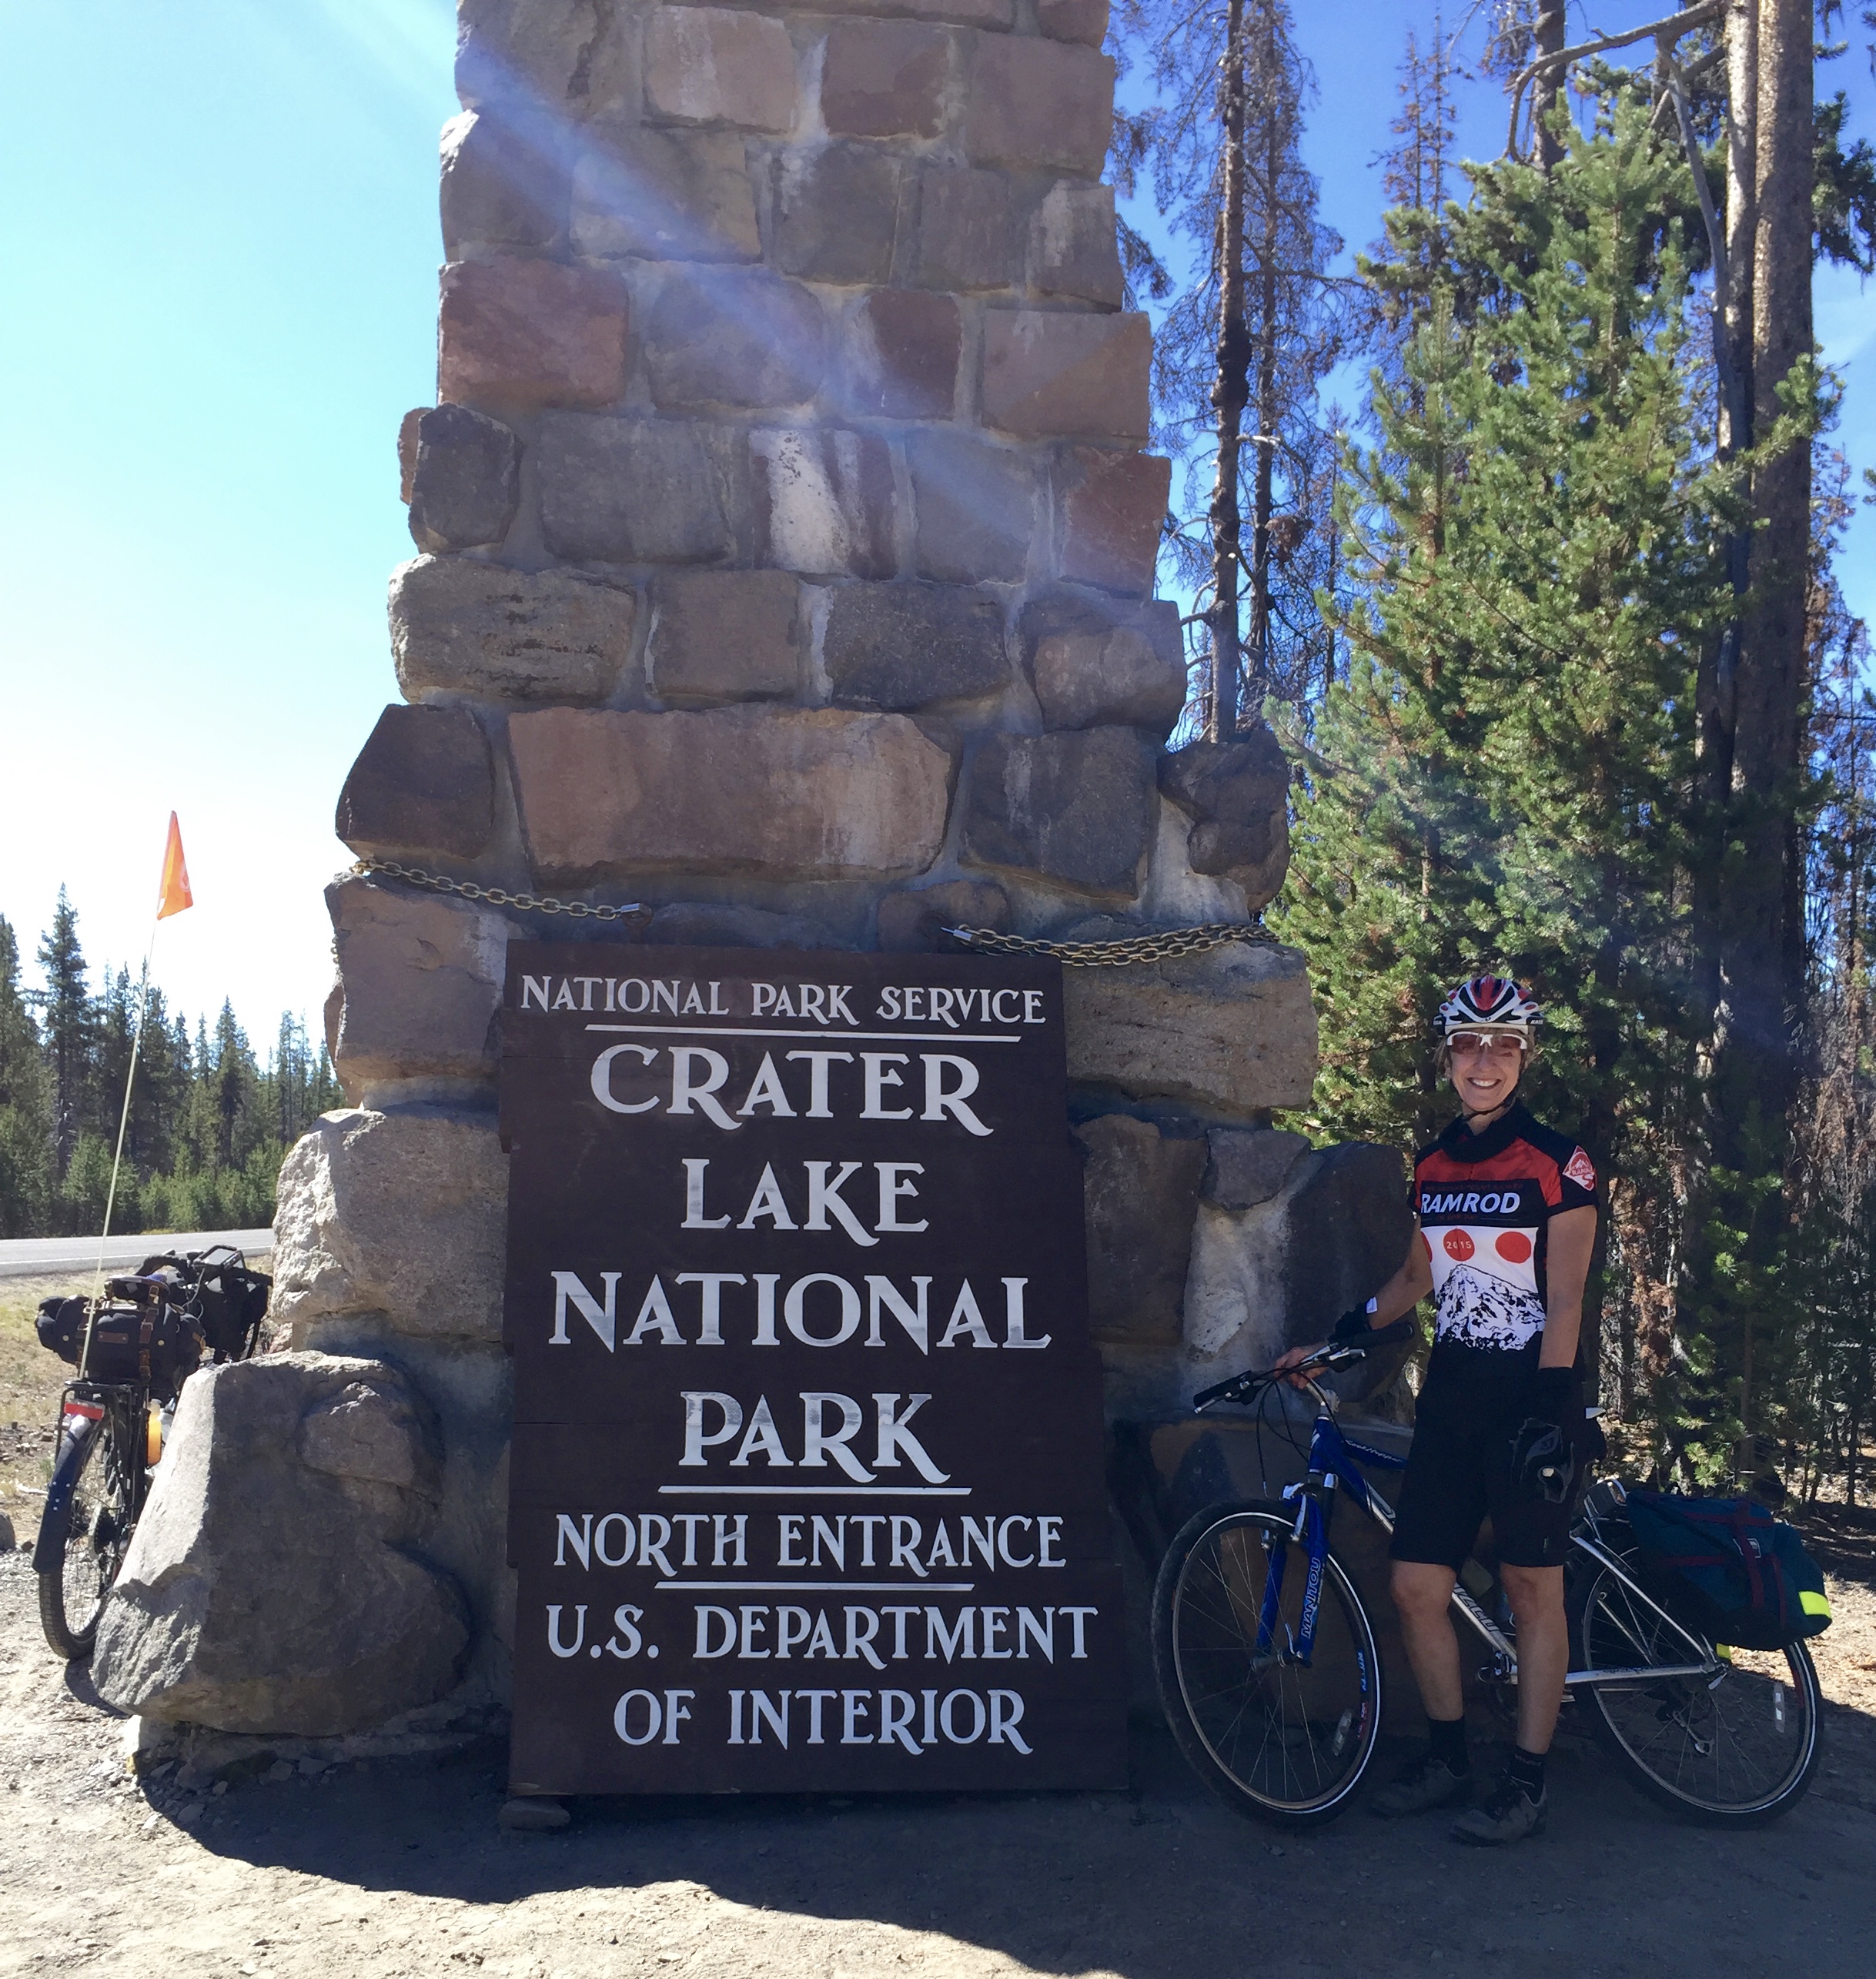 Lorri at the north entrance to Crater Lake